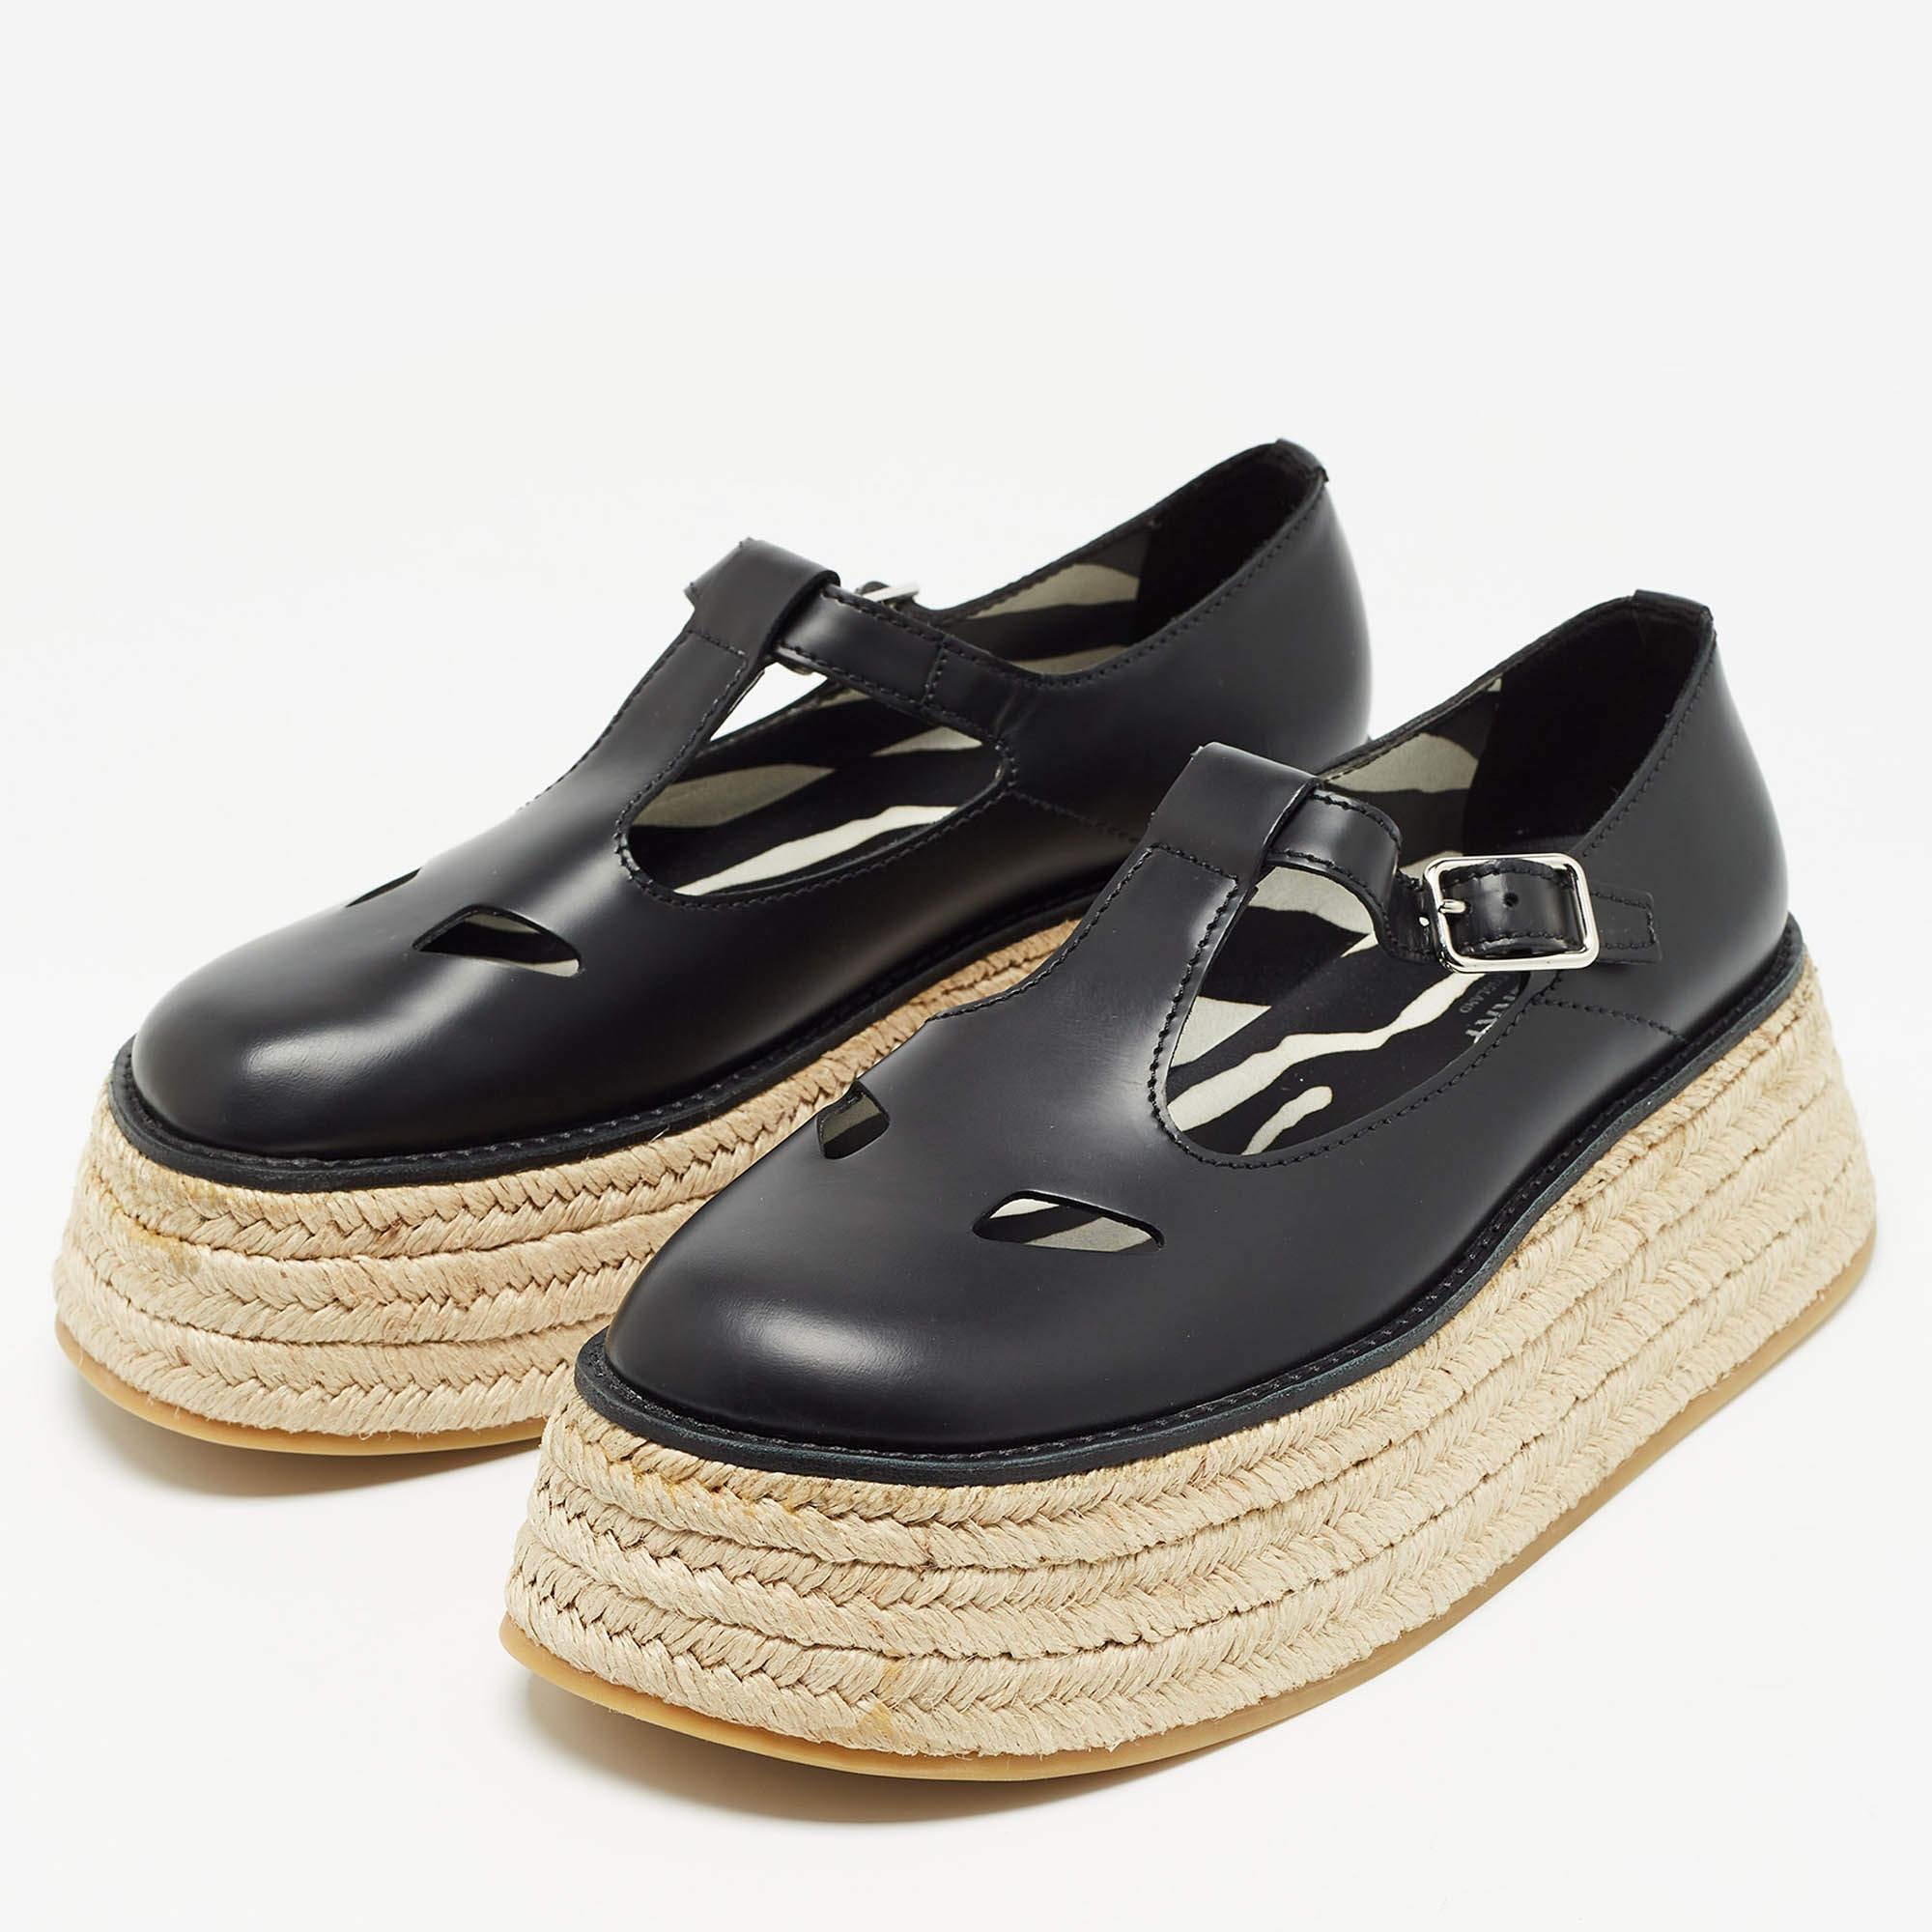 These Aldwych espadrilles exude cool summer vibes while giving all the comfort to your feet. They bring along a well-built silhouette and the house's signature aesthetics. Wear them with anything: jeans, dresses, shorts.

